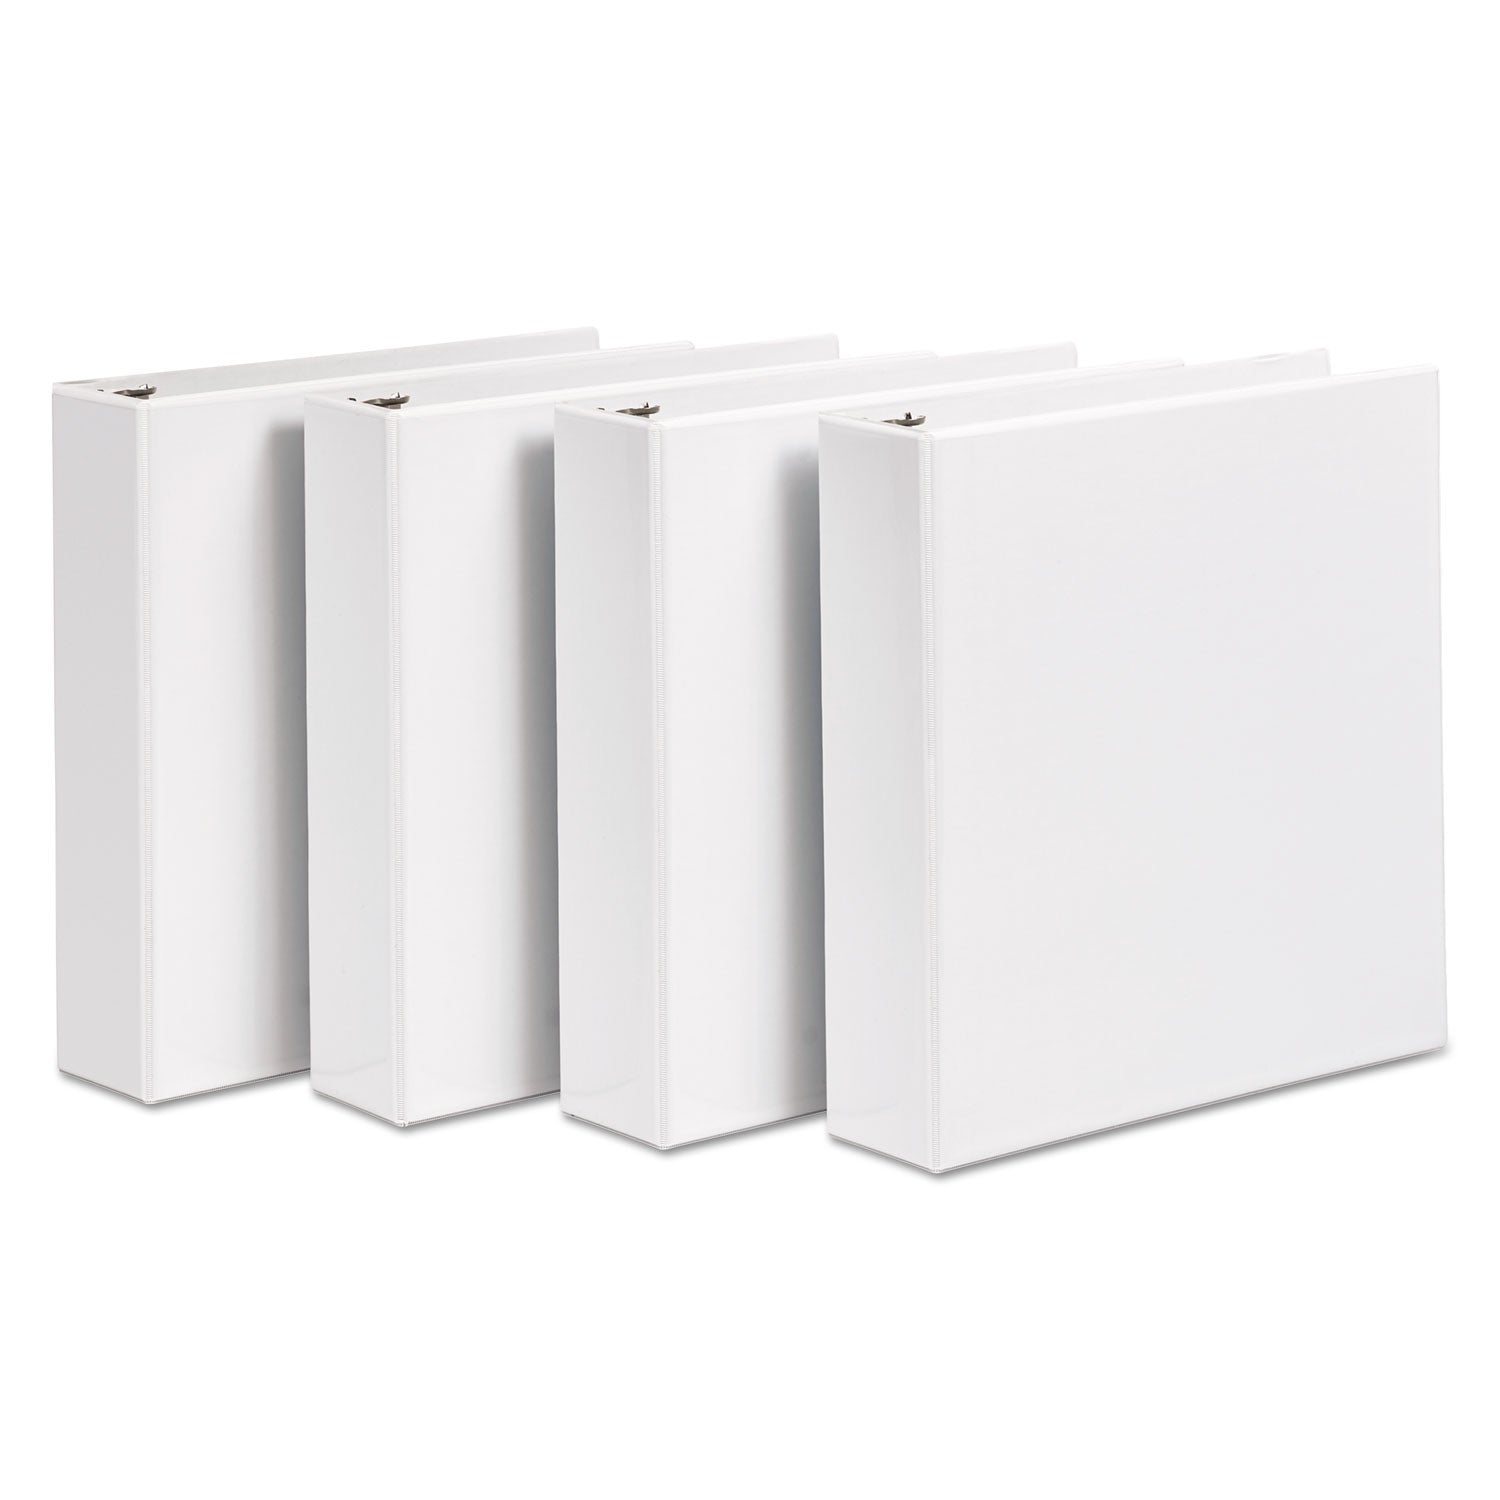 durable-view-binder-with-durahinge-and-slant-rings-3-rings-3-capacity-11-x-85-white-4-pack_ave17030 - 8